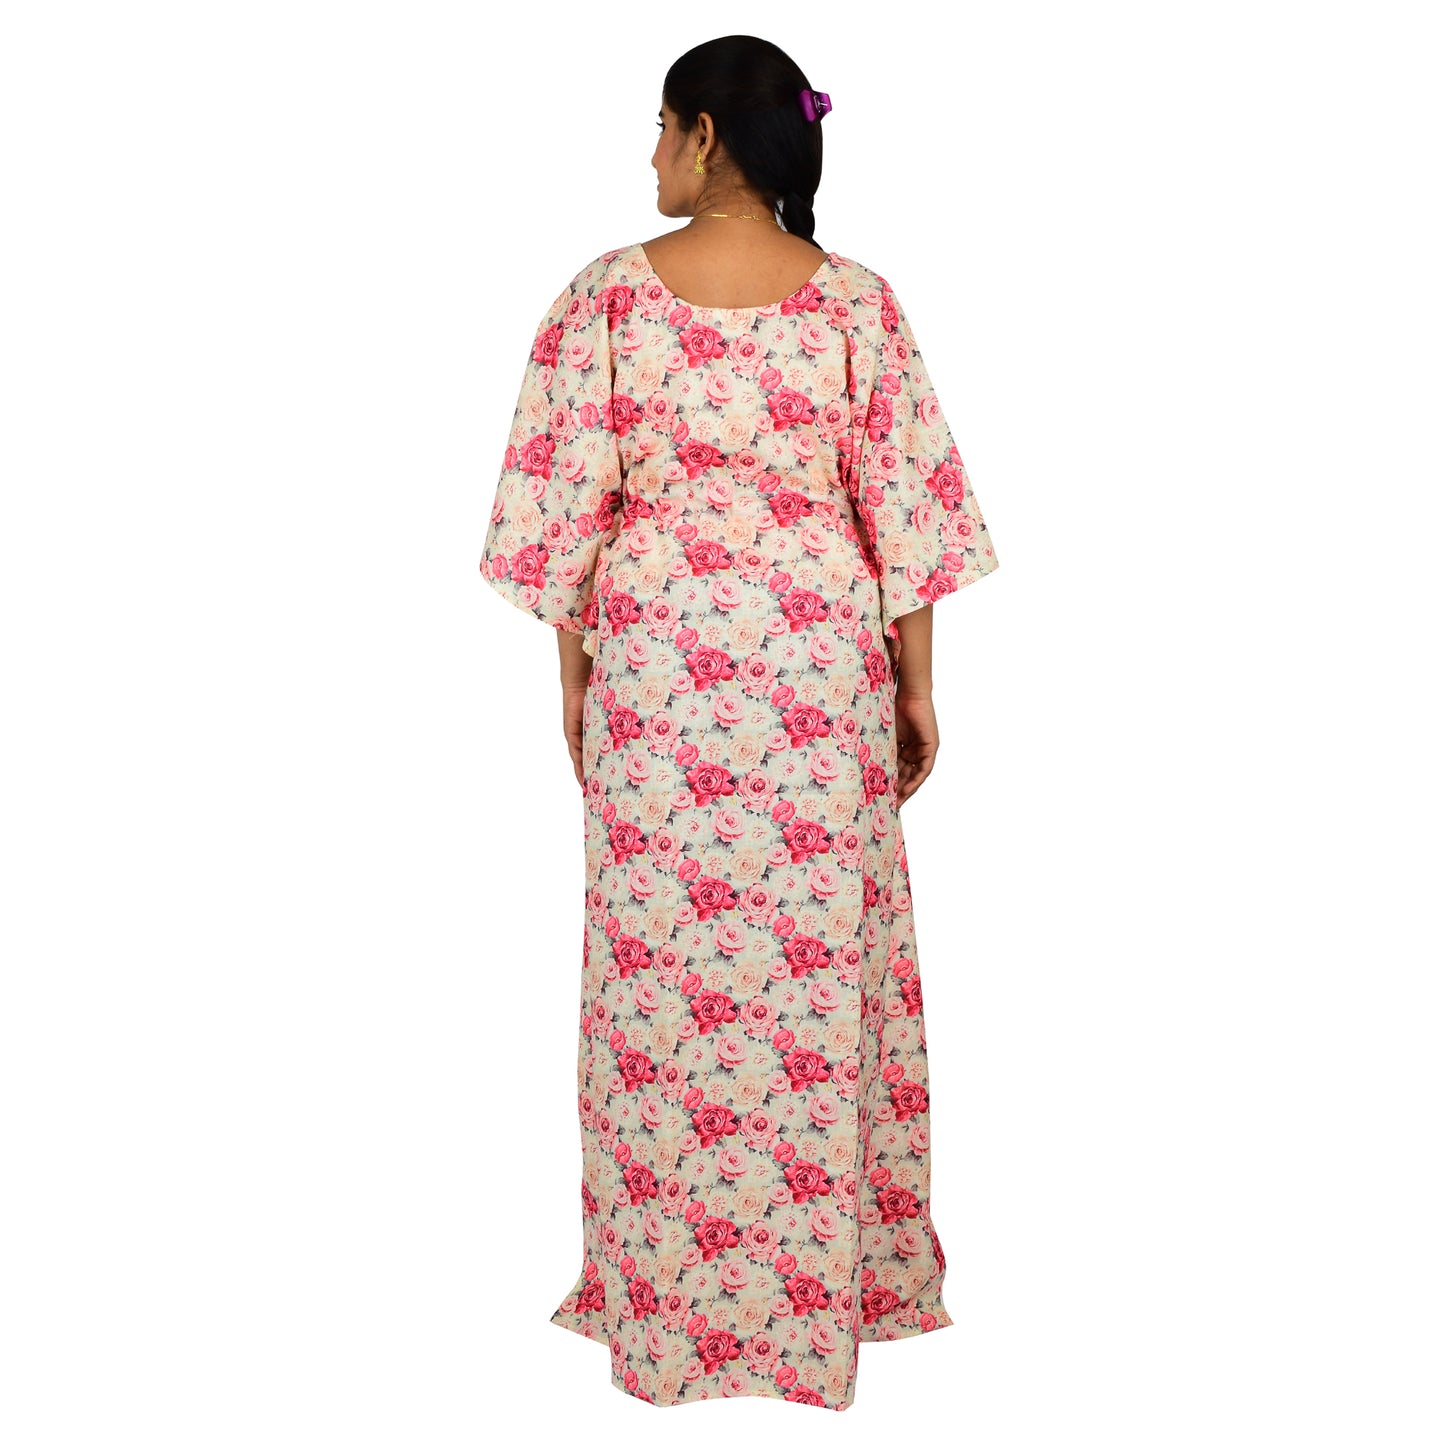 Digital Printed Cotton Blend Nighty For Women - Pink